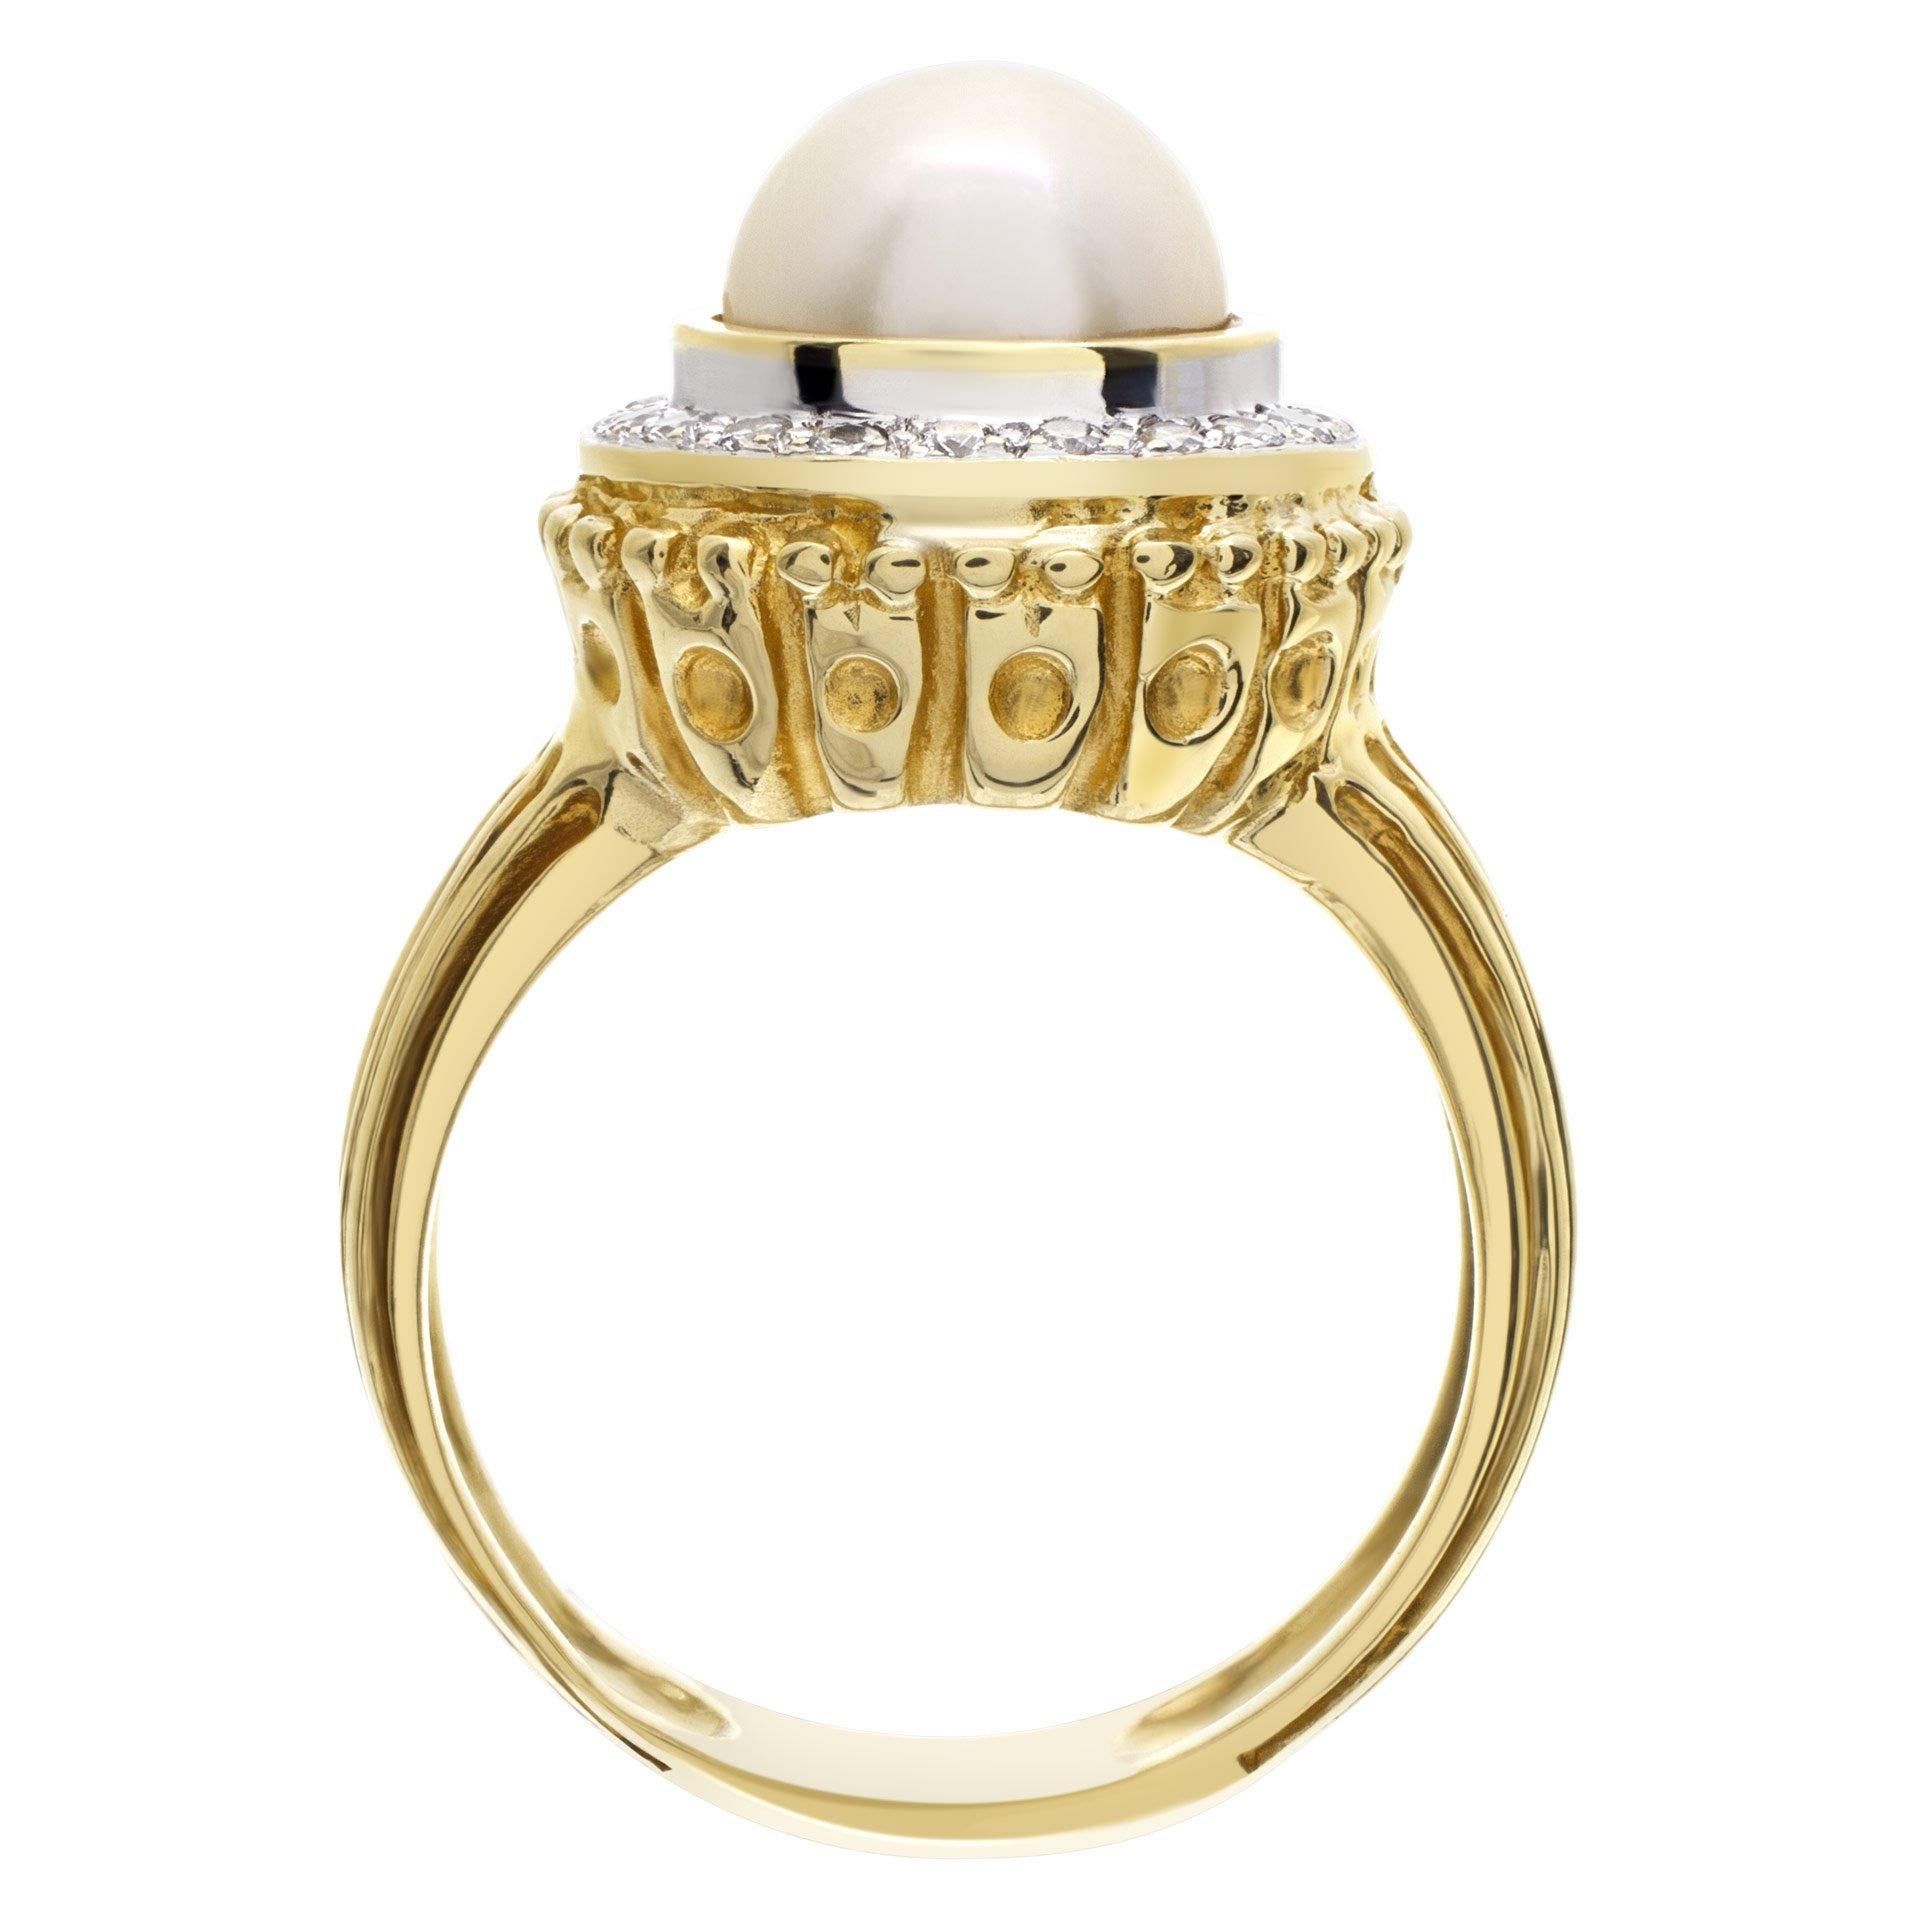 18k Yellow Gold Ring with Pearl and Diamond Accents 0.40 Carat In Excellent Condition For Sale In Surfside, FL